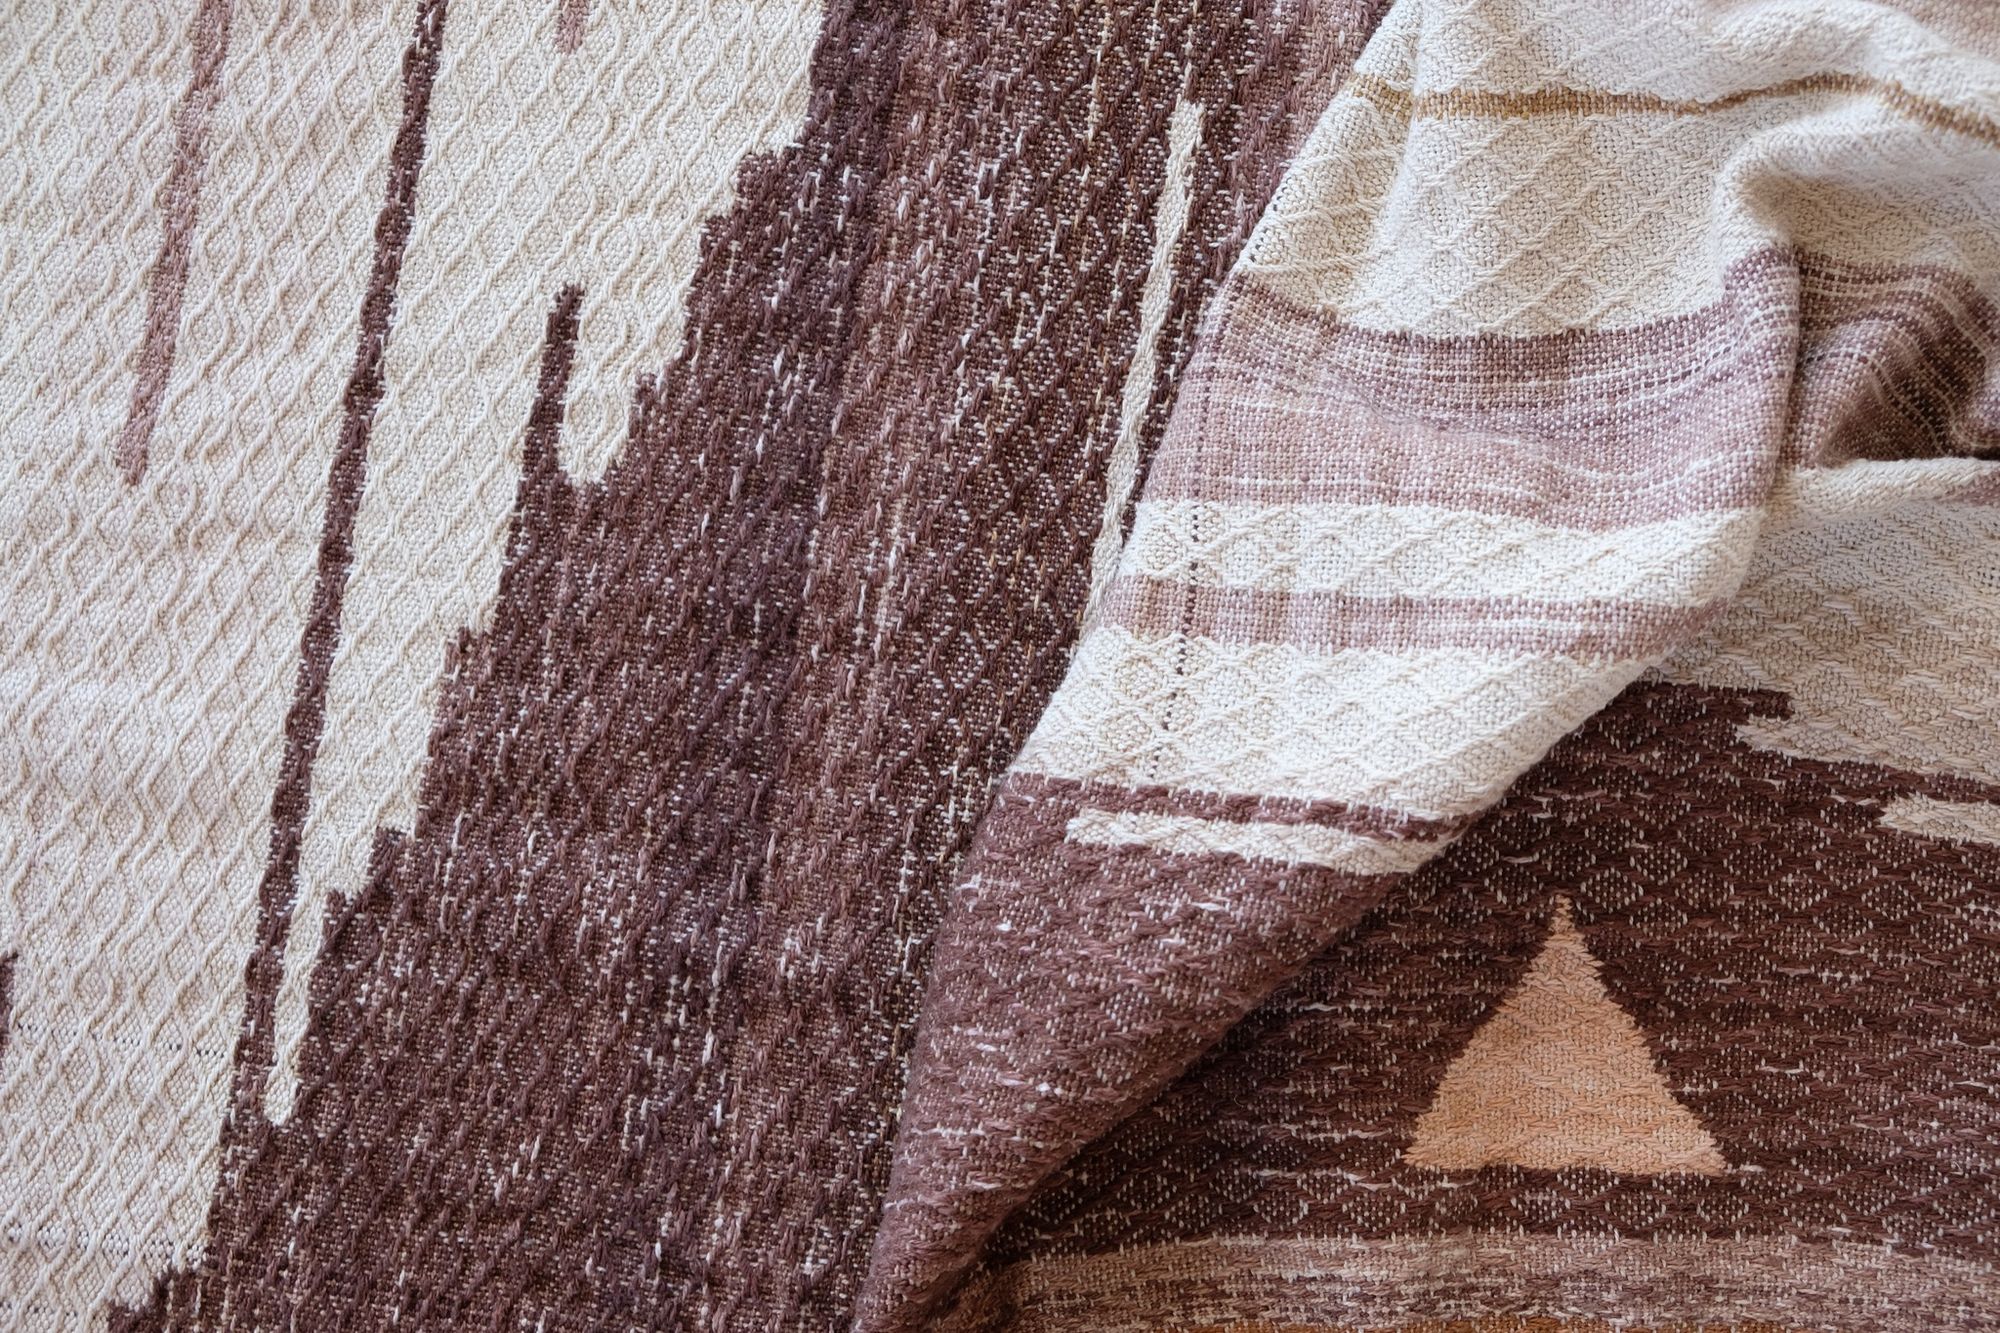 A large piece of handwoven fabric in shades of brown, cream and white rests on a dark wood floor